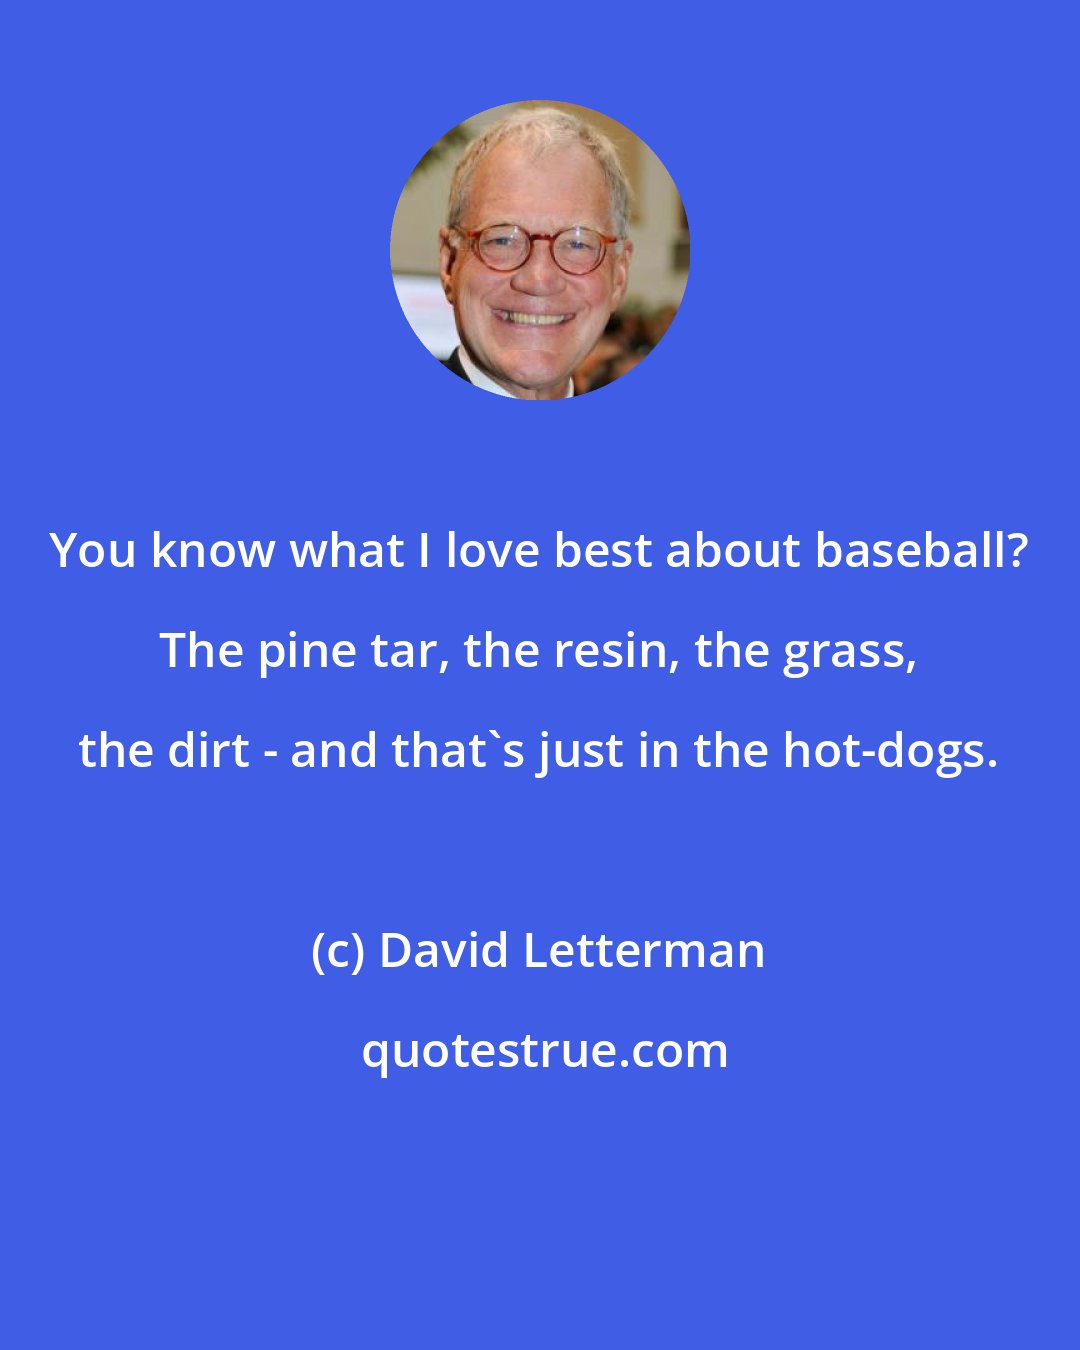 David Letterman: You know what I love best about baseball? The pine tar, the resin, the grass, the dirt - and that's just in the hot-dogs.